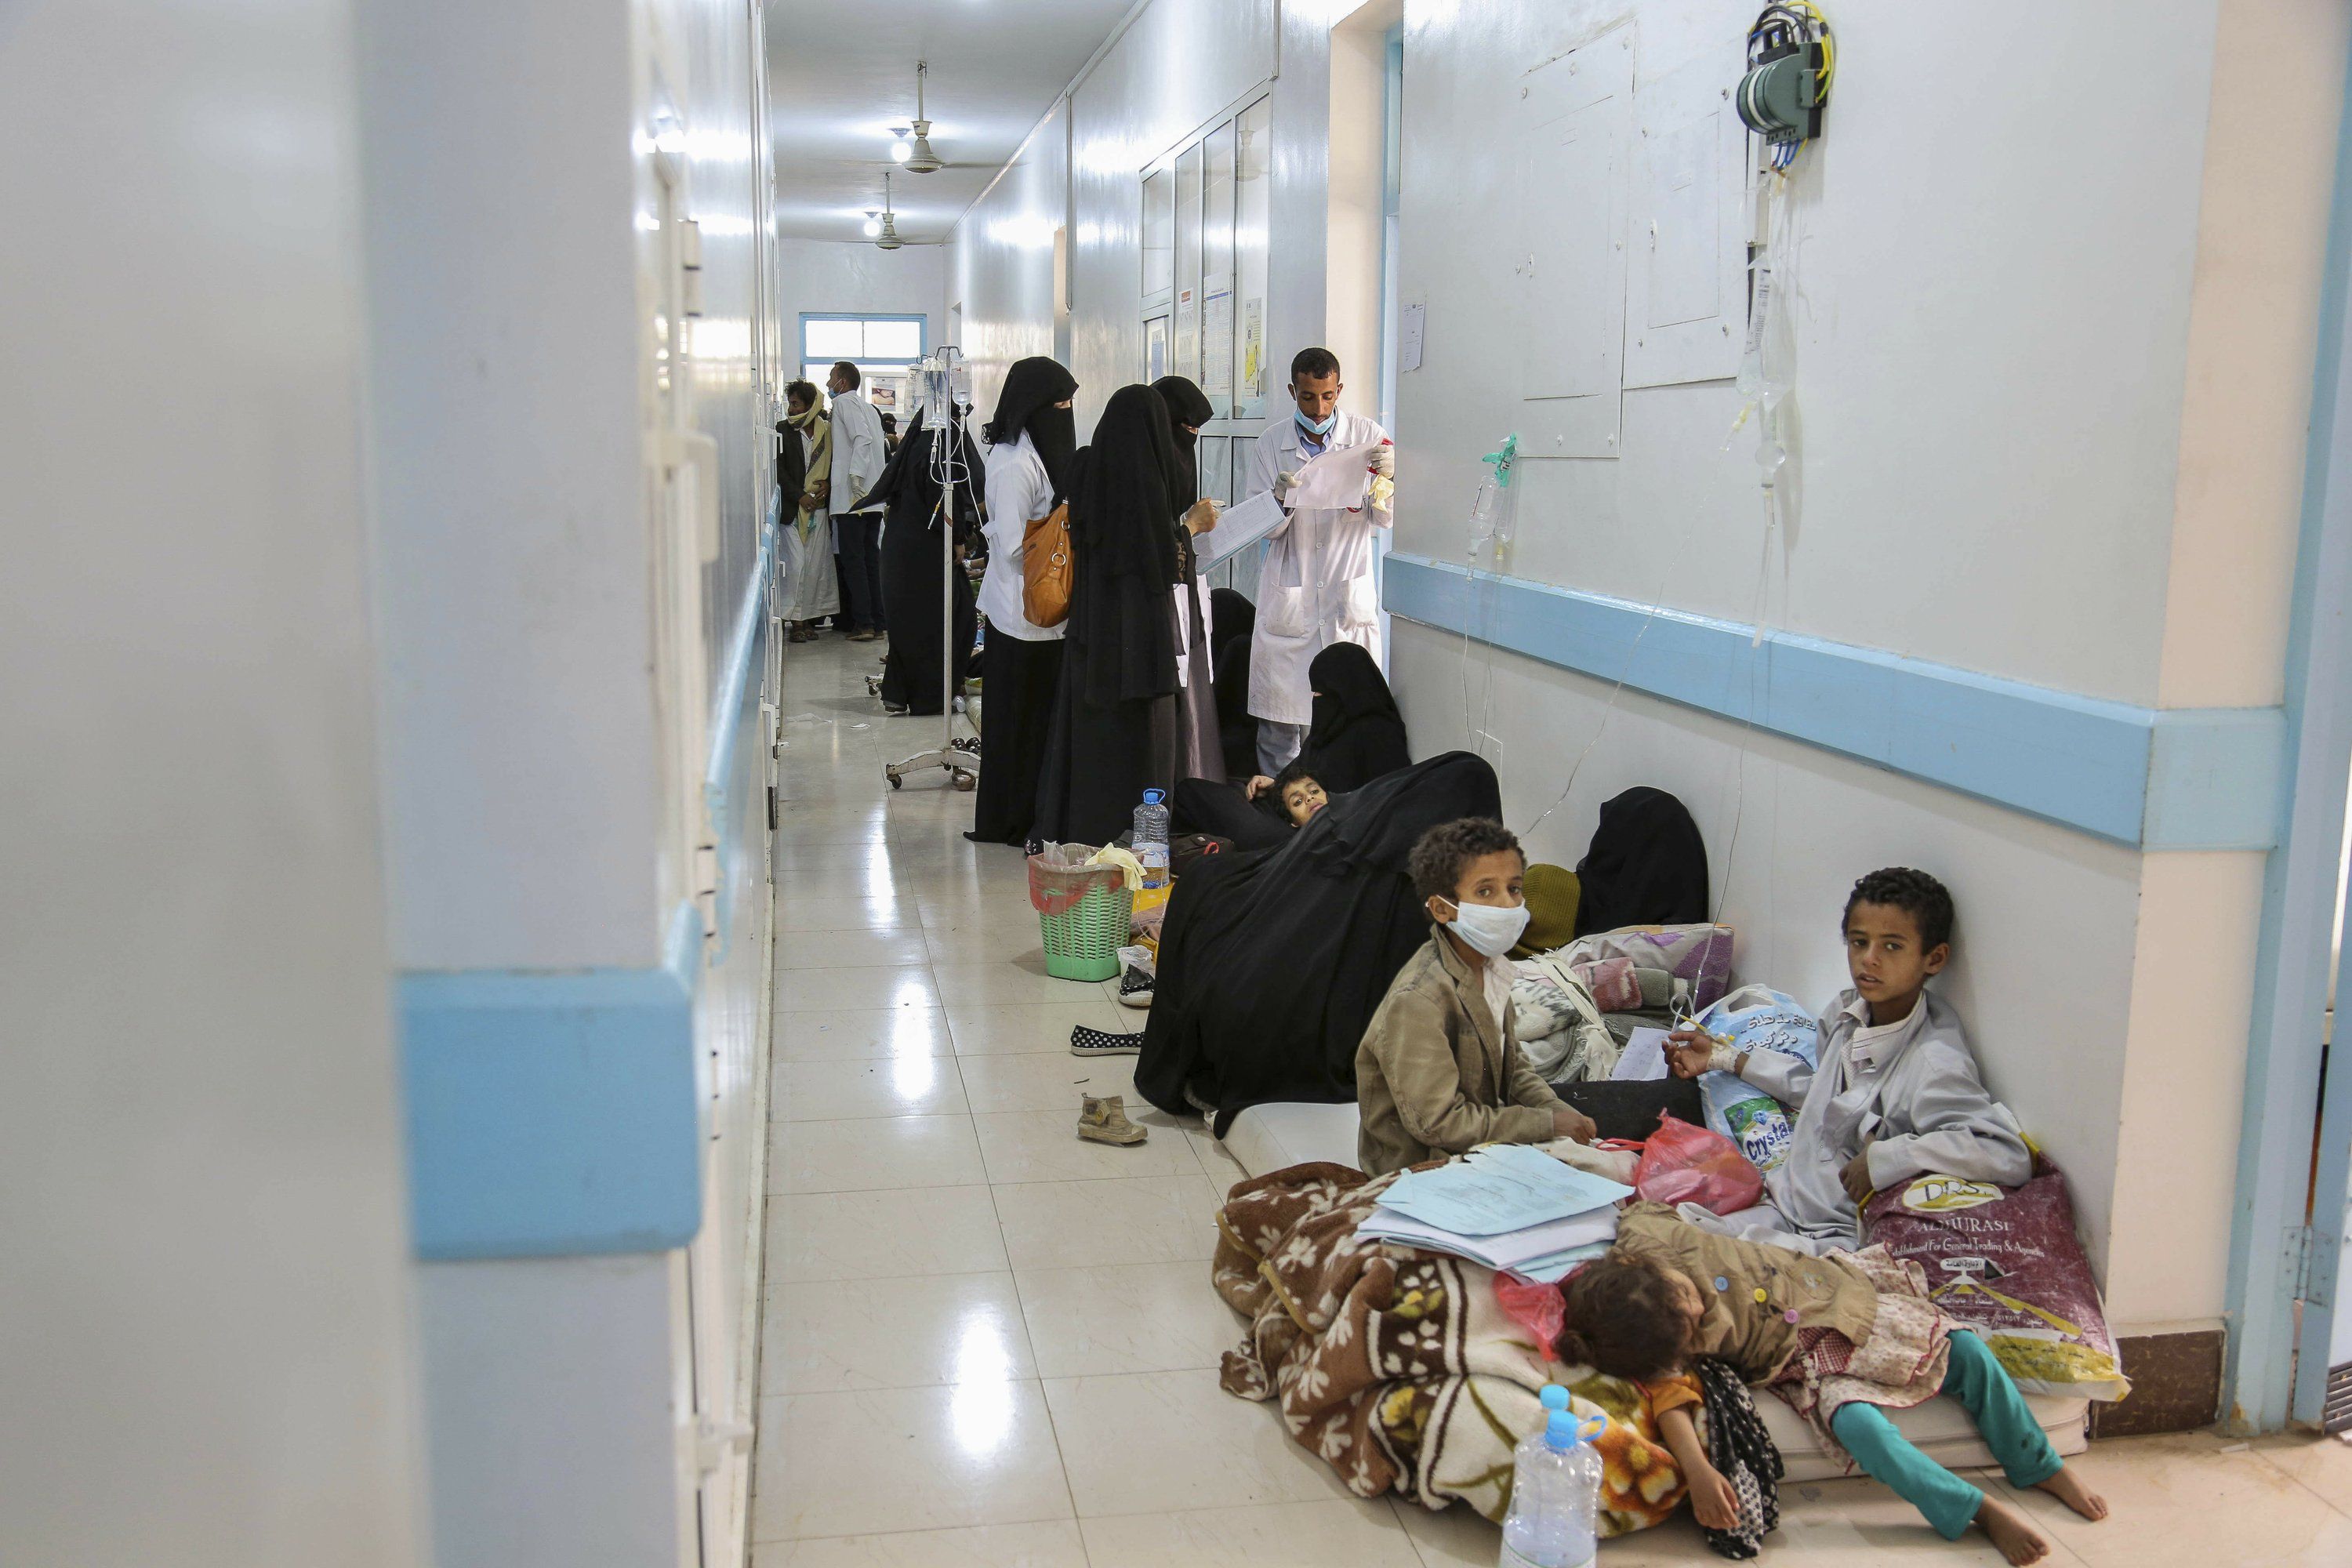 In this May 12, 2017 photo released by UNICEF, patients suffering from severe diarrhea and suspected of cholera, wait to receive treatment, at a hospital in Sanaa, Yemen. An Associated Press investigation finds that Yemen’s massive cholera epidemic was aggravated by corruption and official intransigence. The investigation has found that both the Iranian-backed Houthis rebels and their main adversary in the war—the U.S.—and Saudi-backed government that controls southern Yemen—impeded efforts by relief groups to stem the epidemic. Image courtesy of UNICEF via AP. Yemen, 2017.